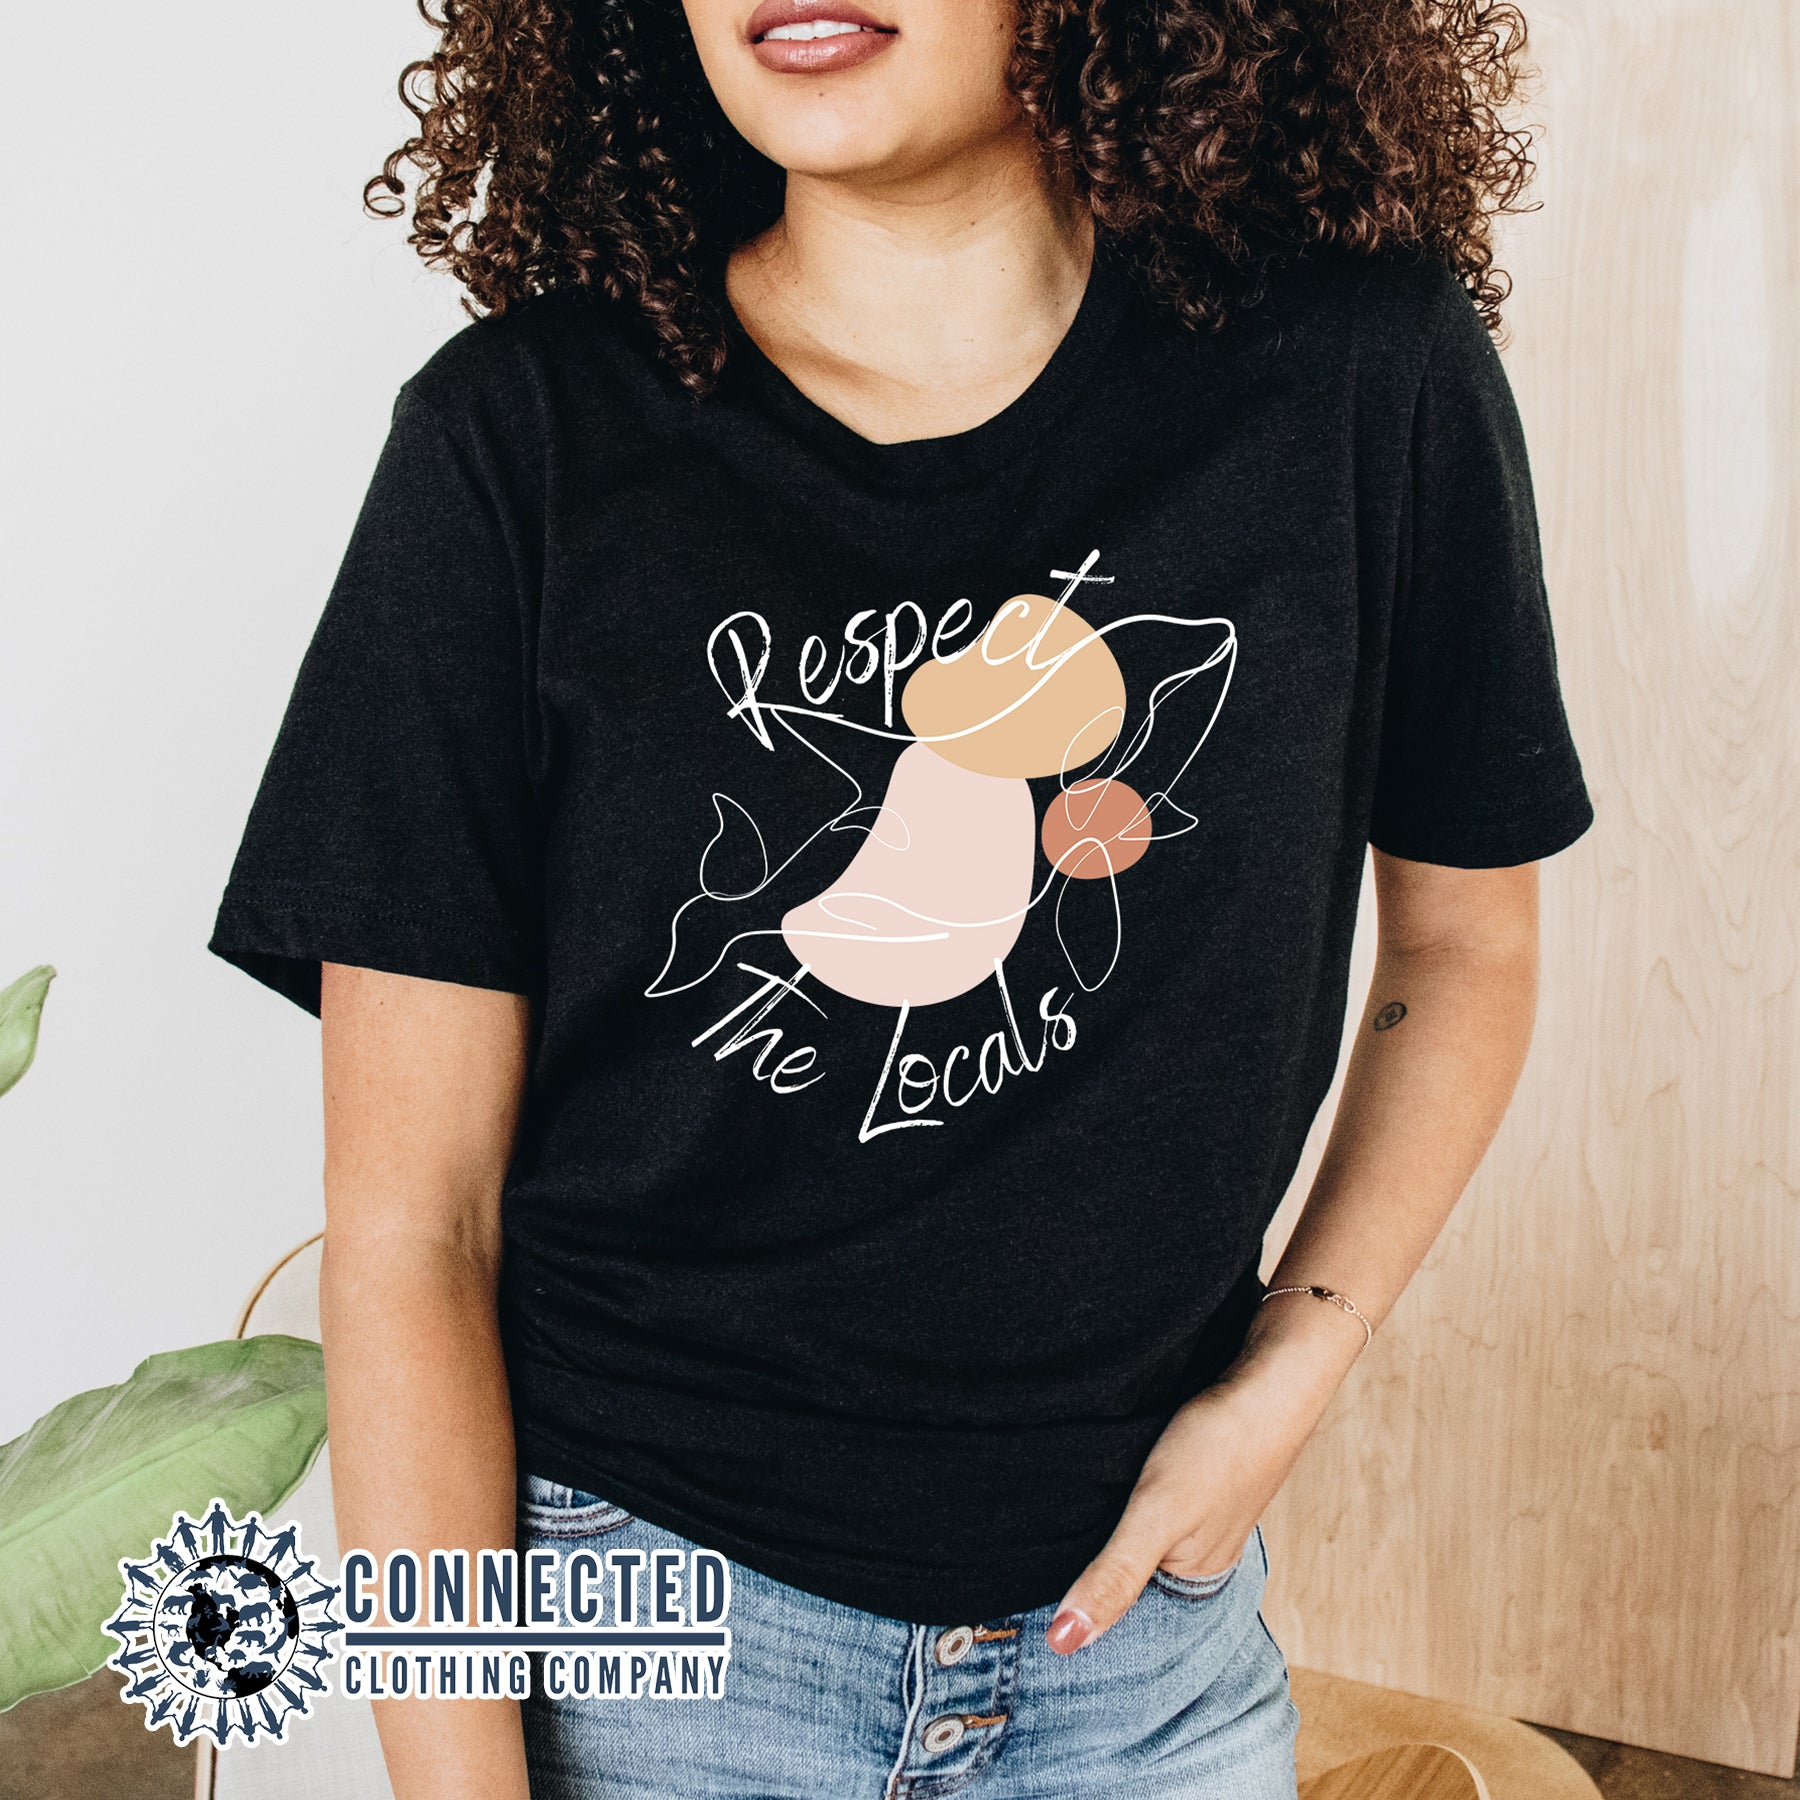  Model Wearing Black Respect The Locals Orca Unisex Short-Sleeve Tee - sweetsherriloudesigns - Ethically and Sustainably Made - 10% of profits donated to orca conservation